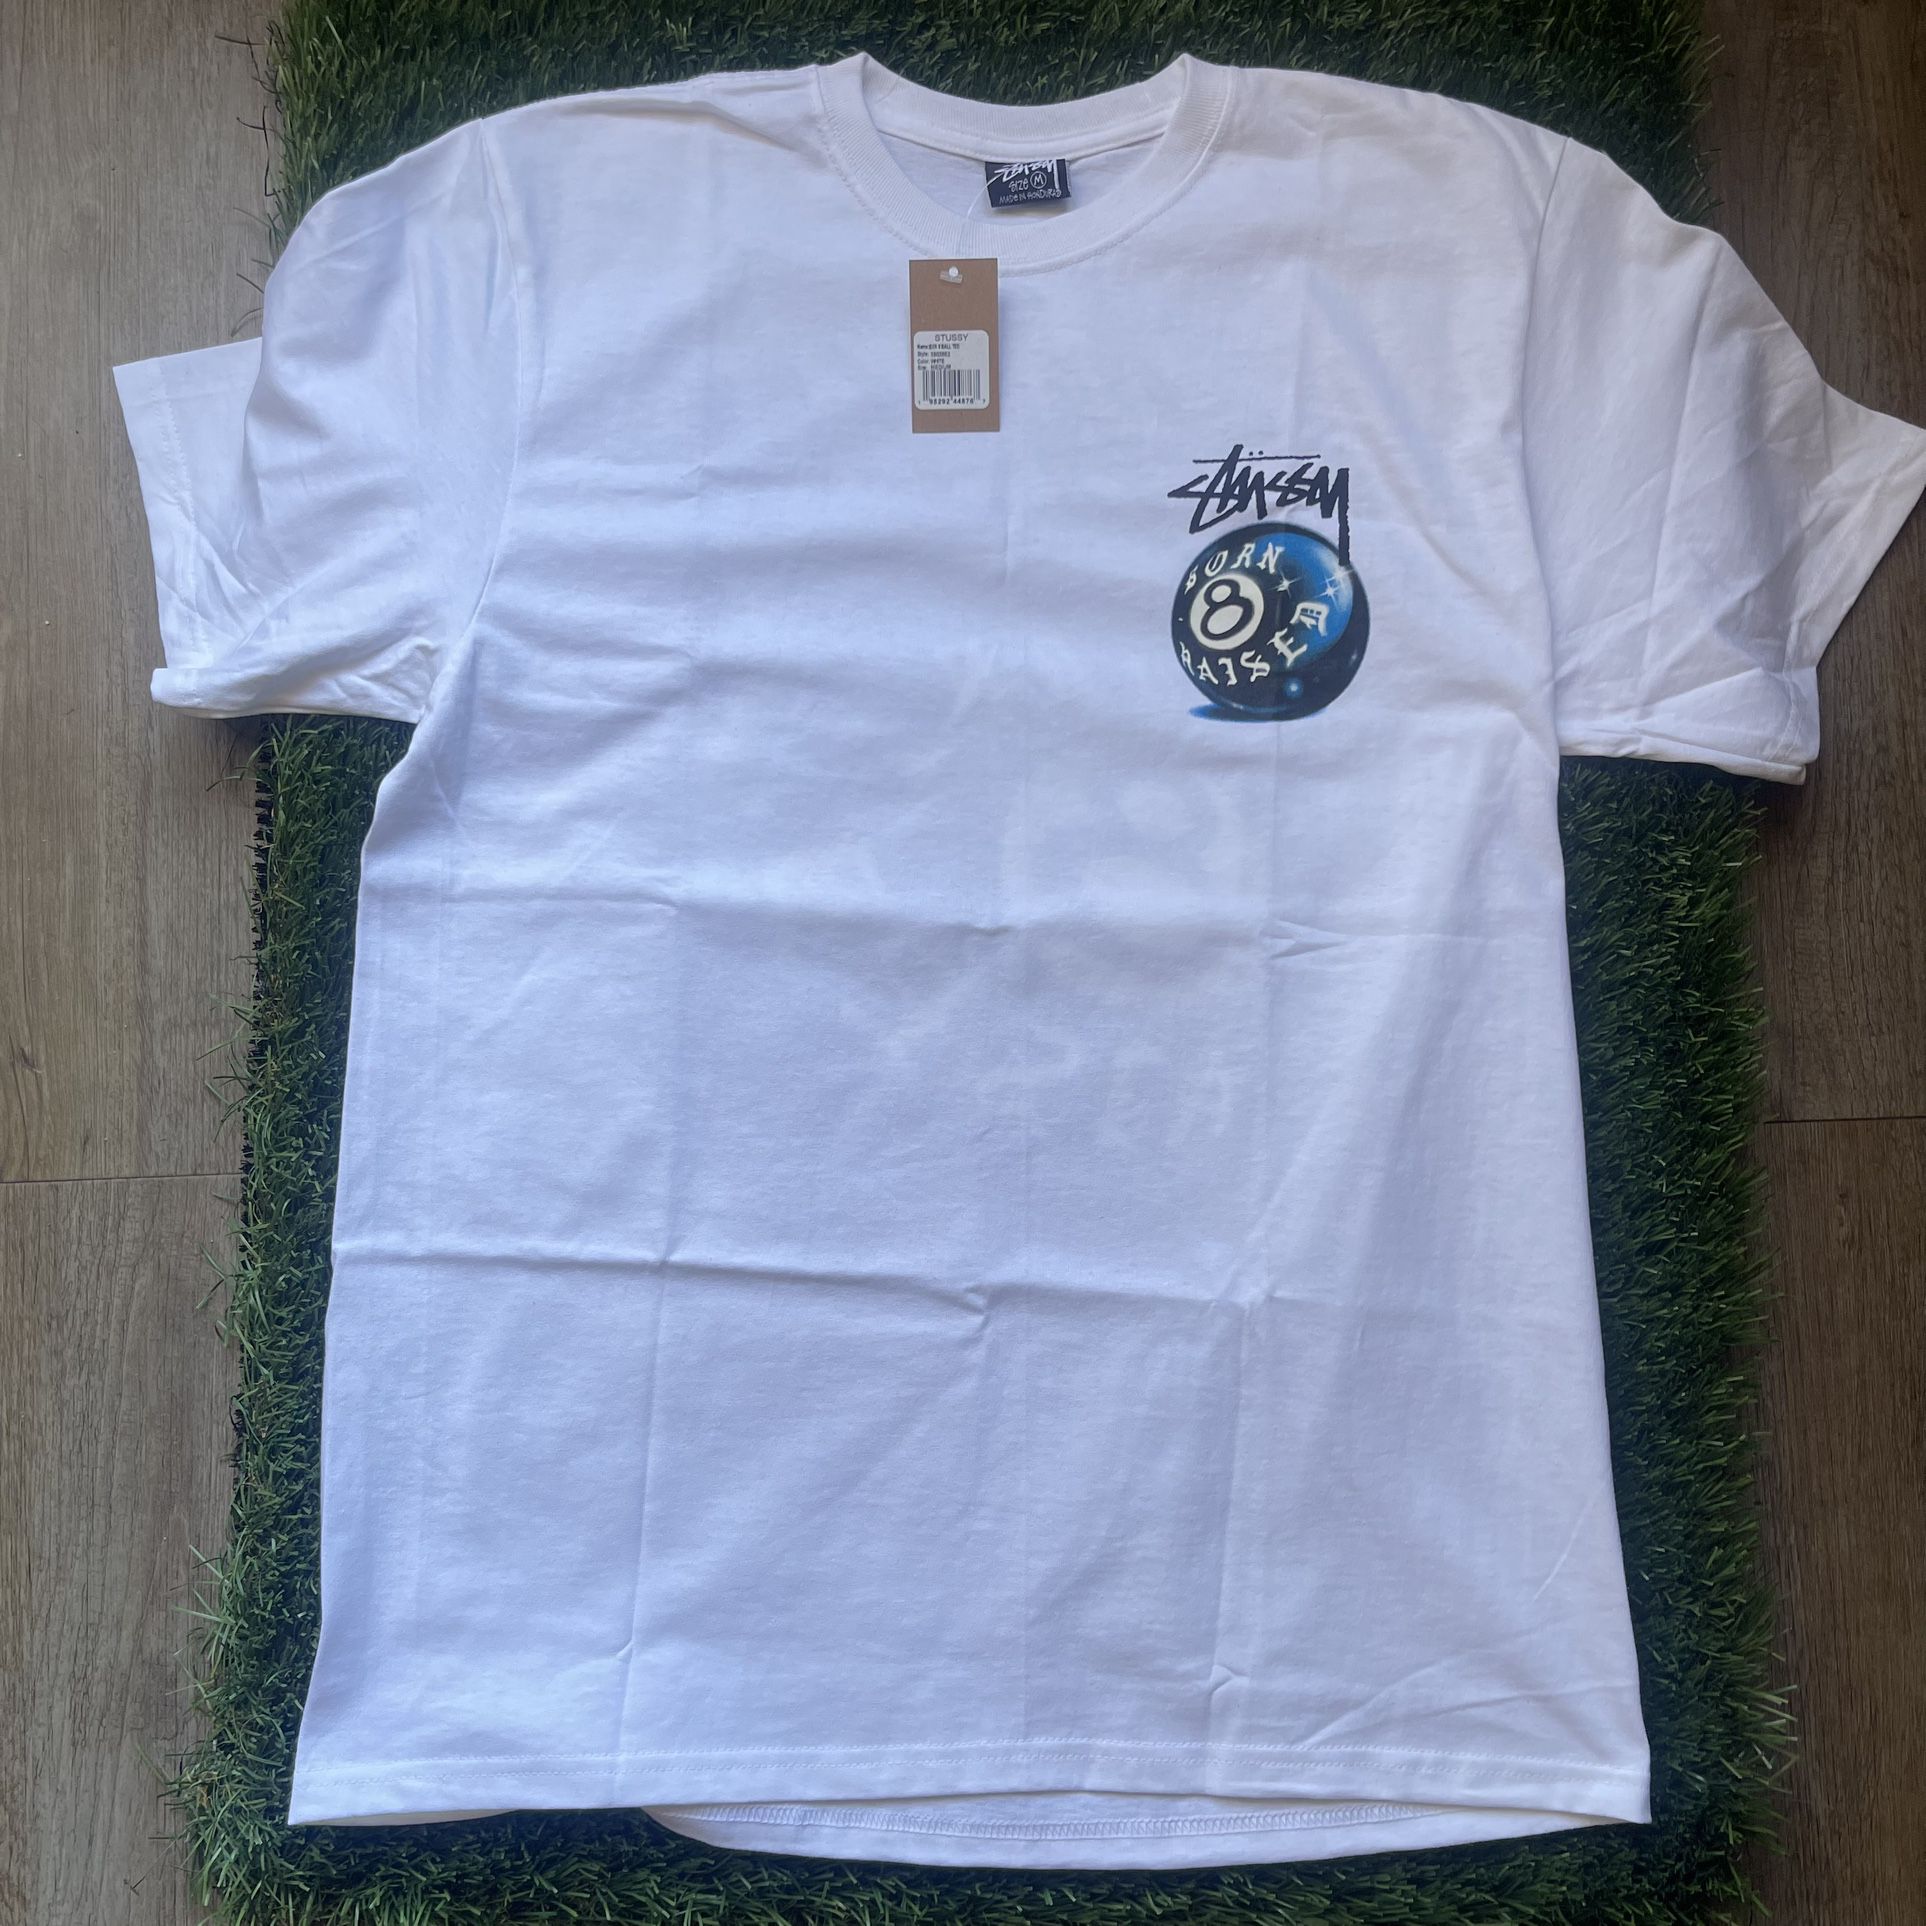 Stussy X Born x Raised 8 Ball Tee Size S, M & L for Sale in Santa